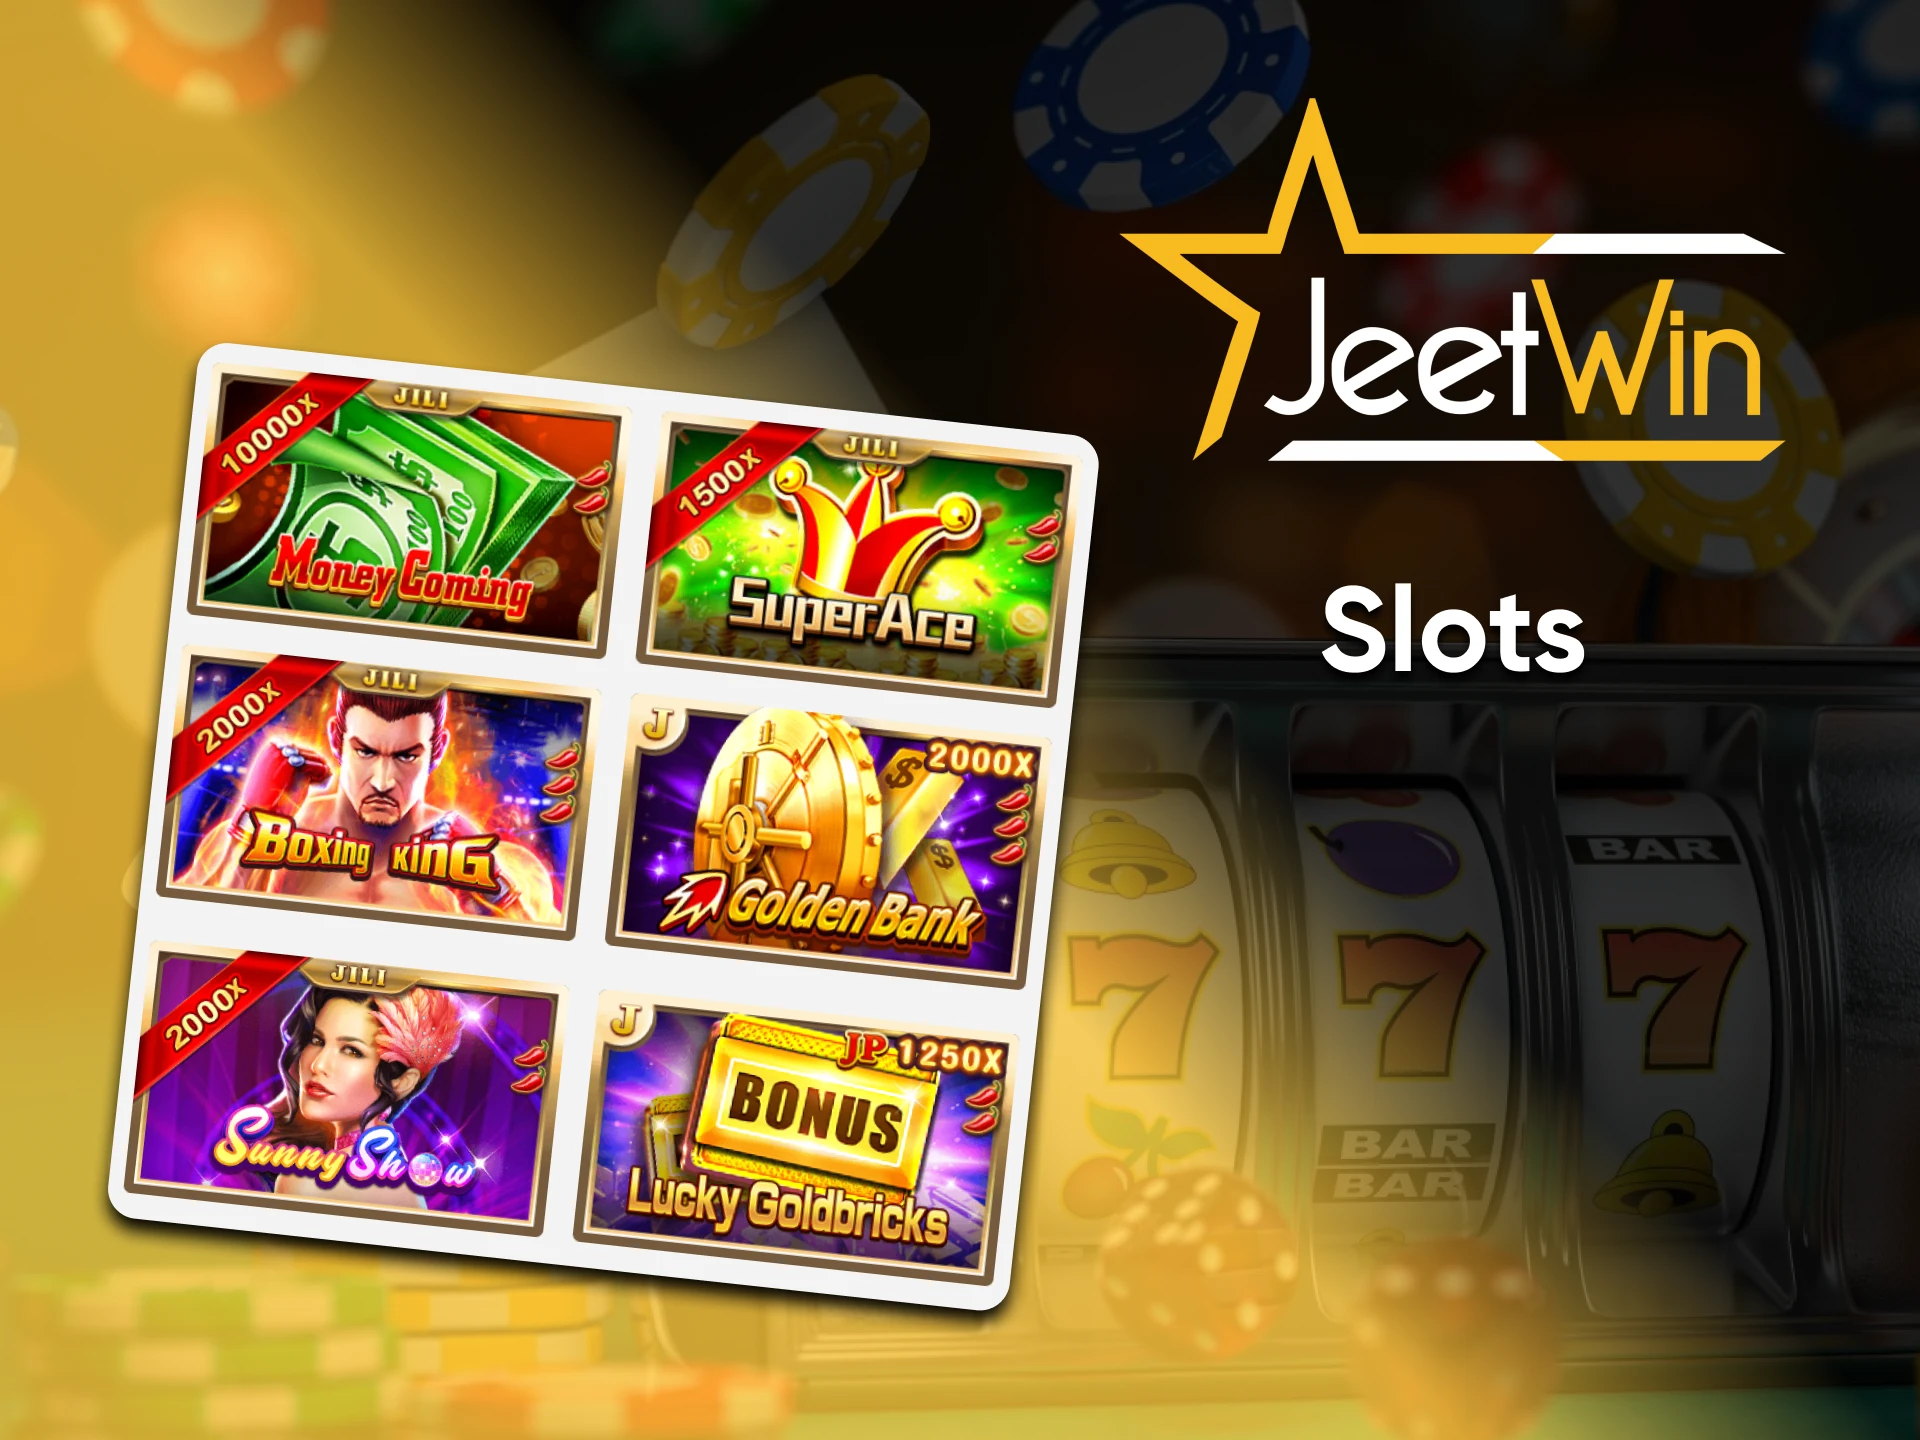 To play Slots, you need to go to the desired section of the Jeetwin website.